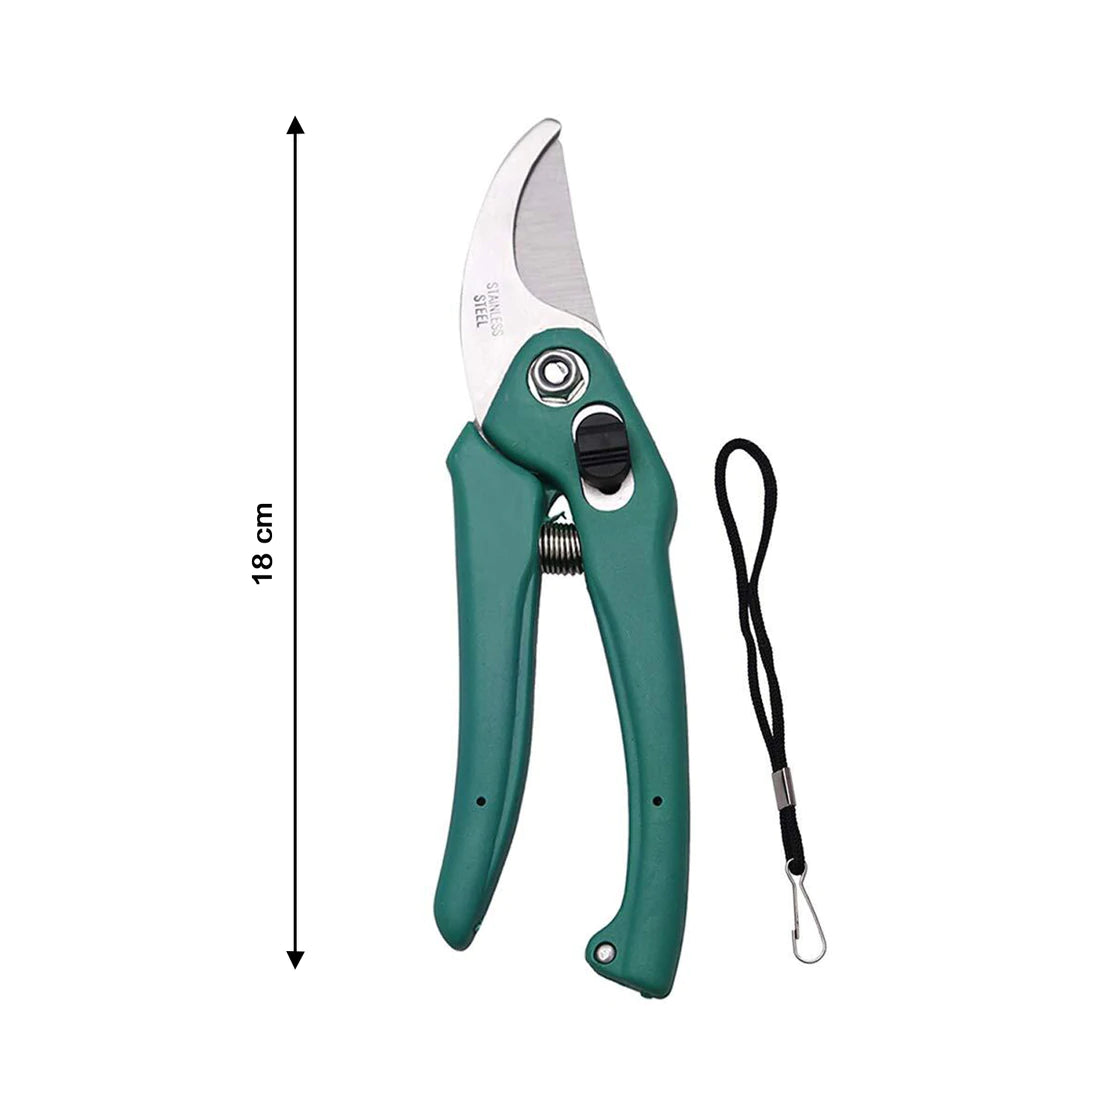 GARDEN SHEARS PRUNERS SCISSOR FOR CUTTING BRANCHES, FLOWERS, LEAVES, PRUNING SEEDS